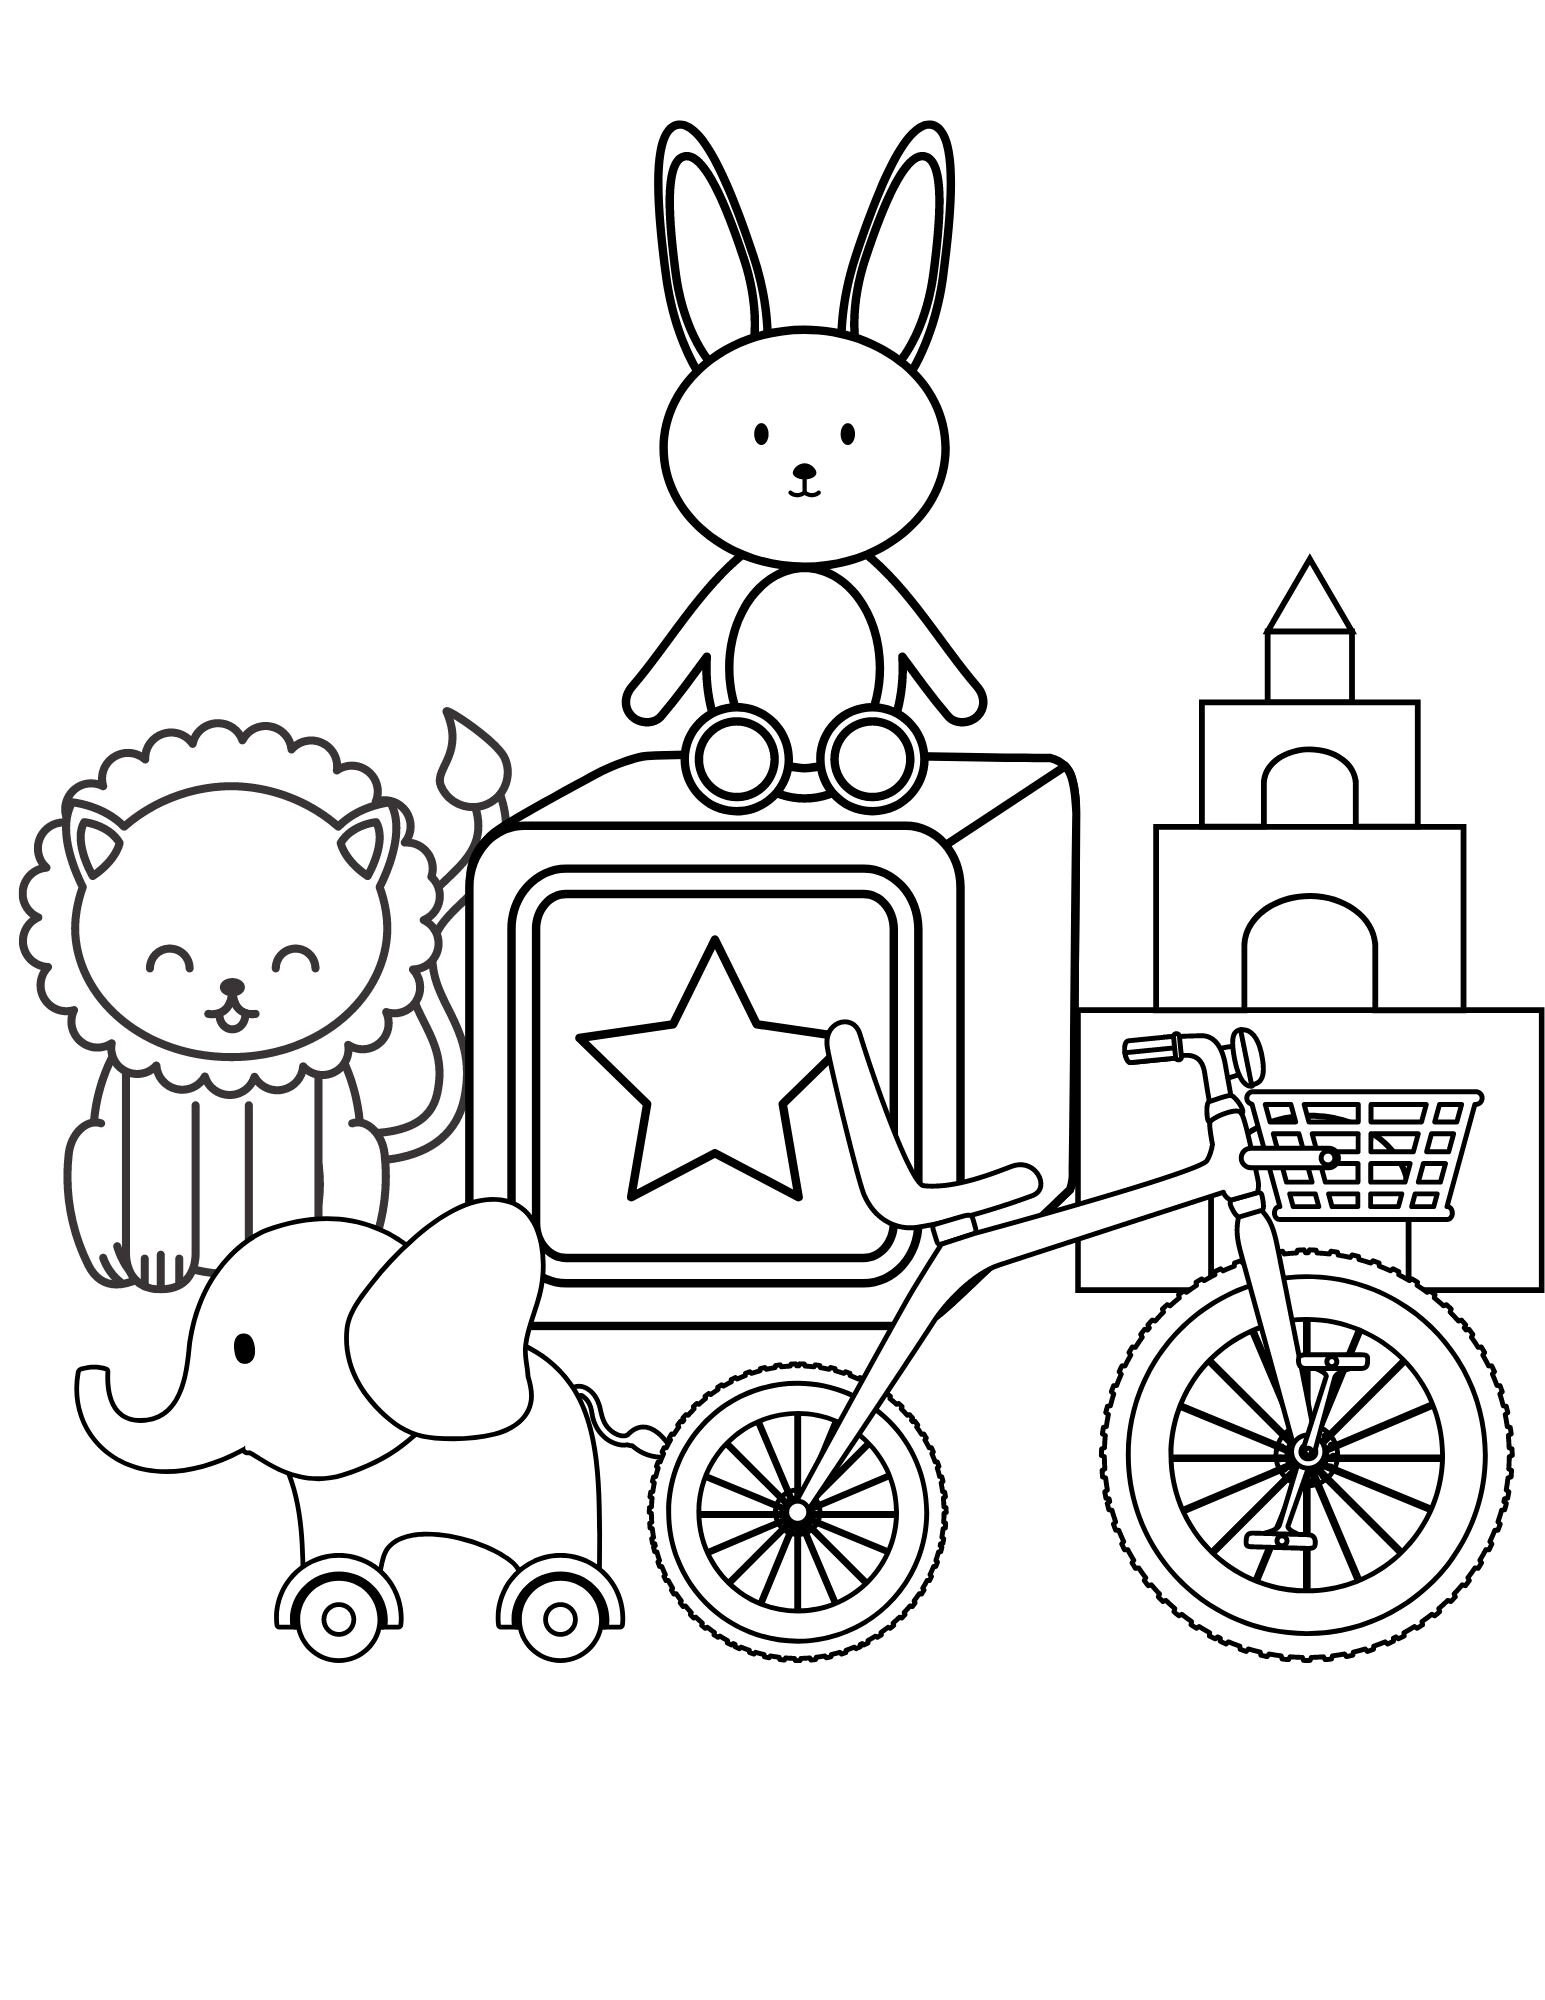 Toys coloring pages toys pdf toys printables toys coloring pages toys activity sheets toys print